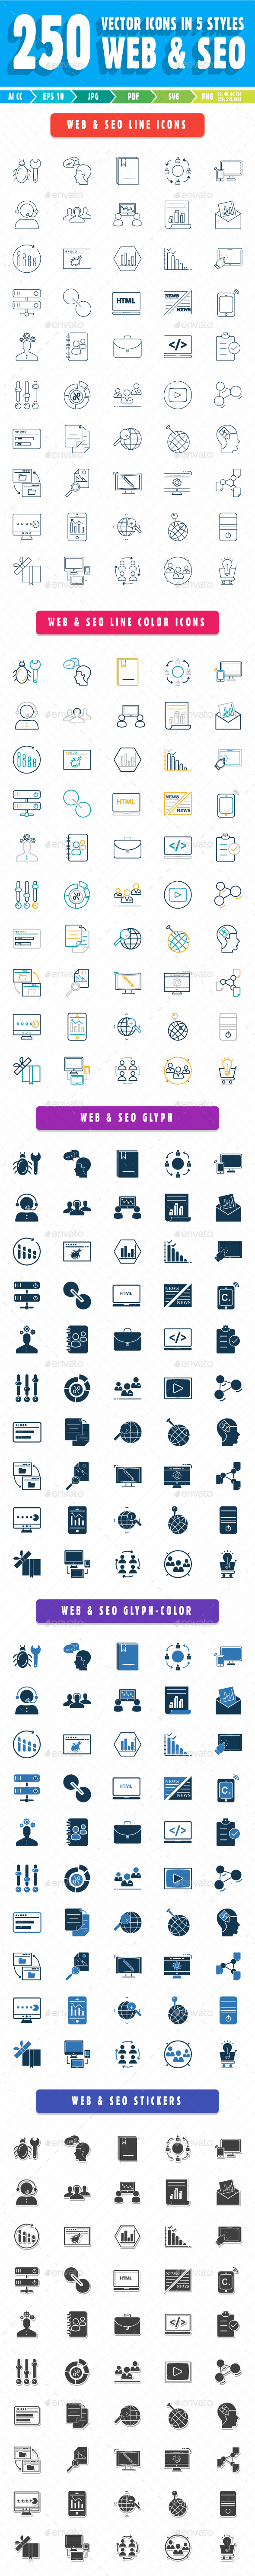 250 Web and SEO Icons Pack